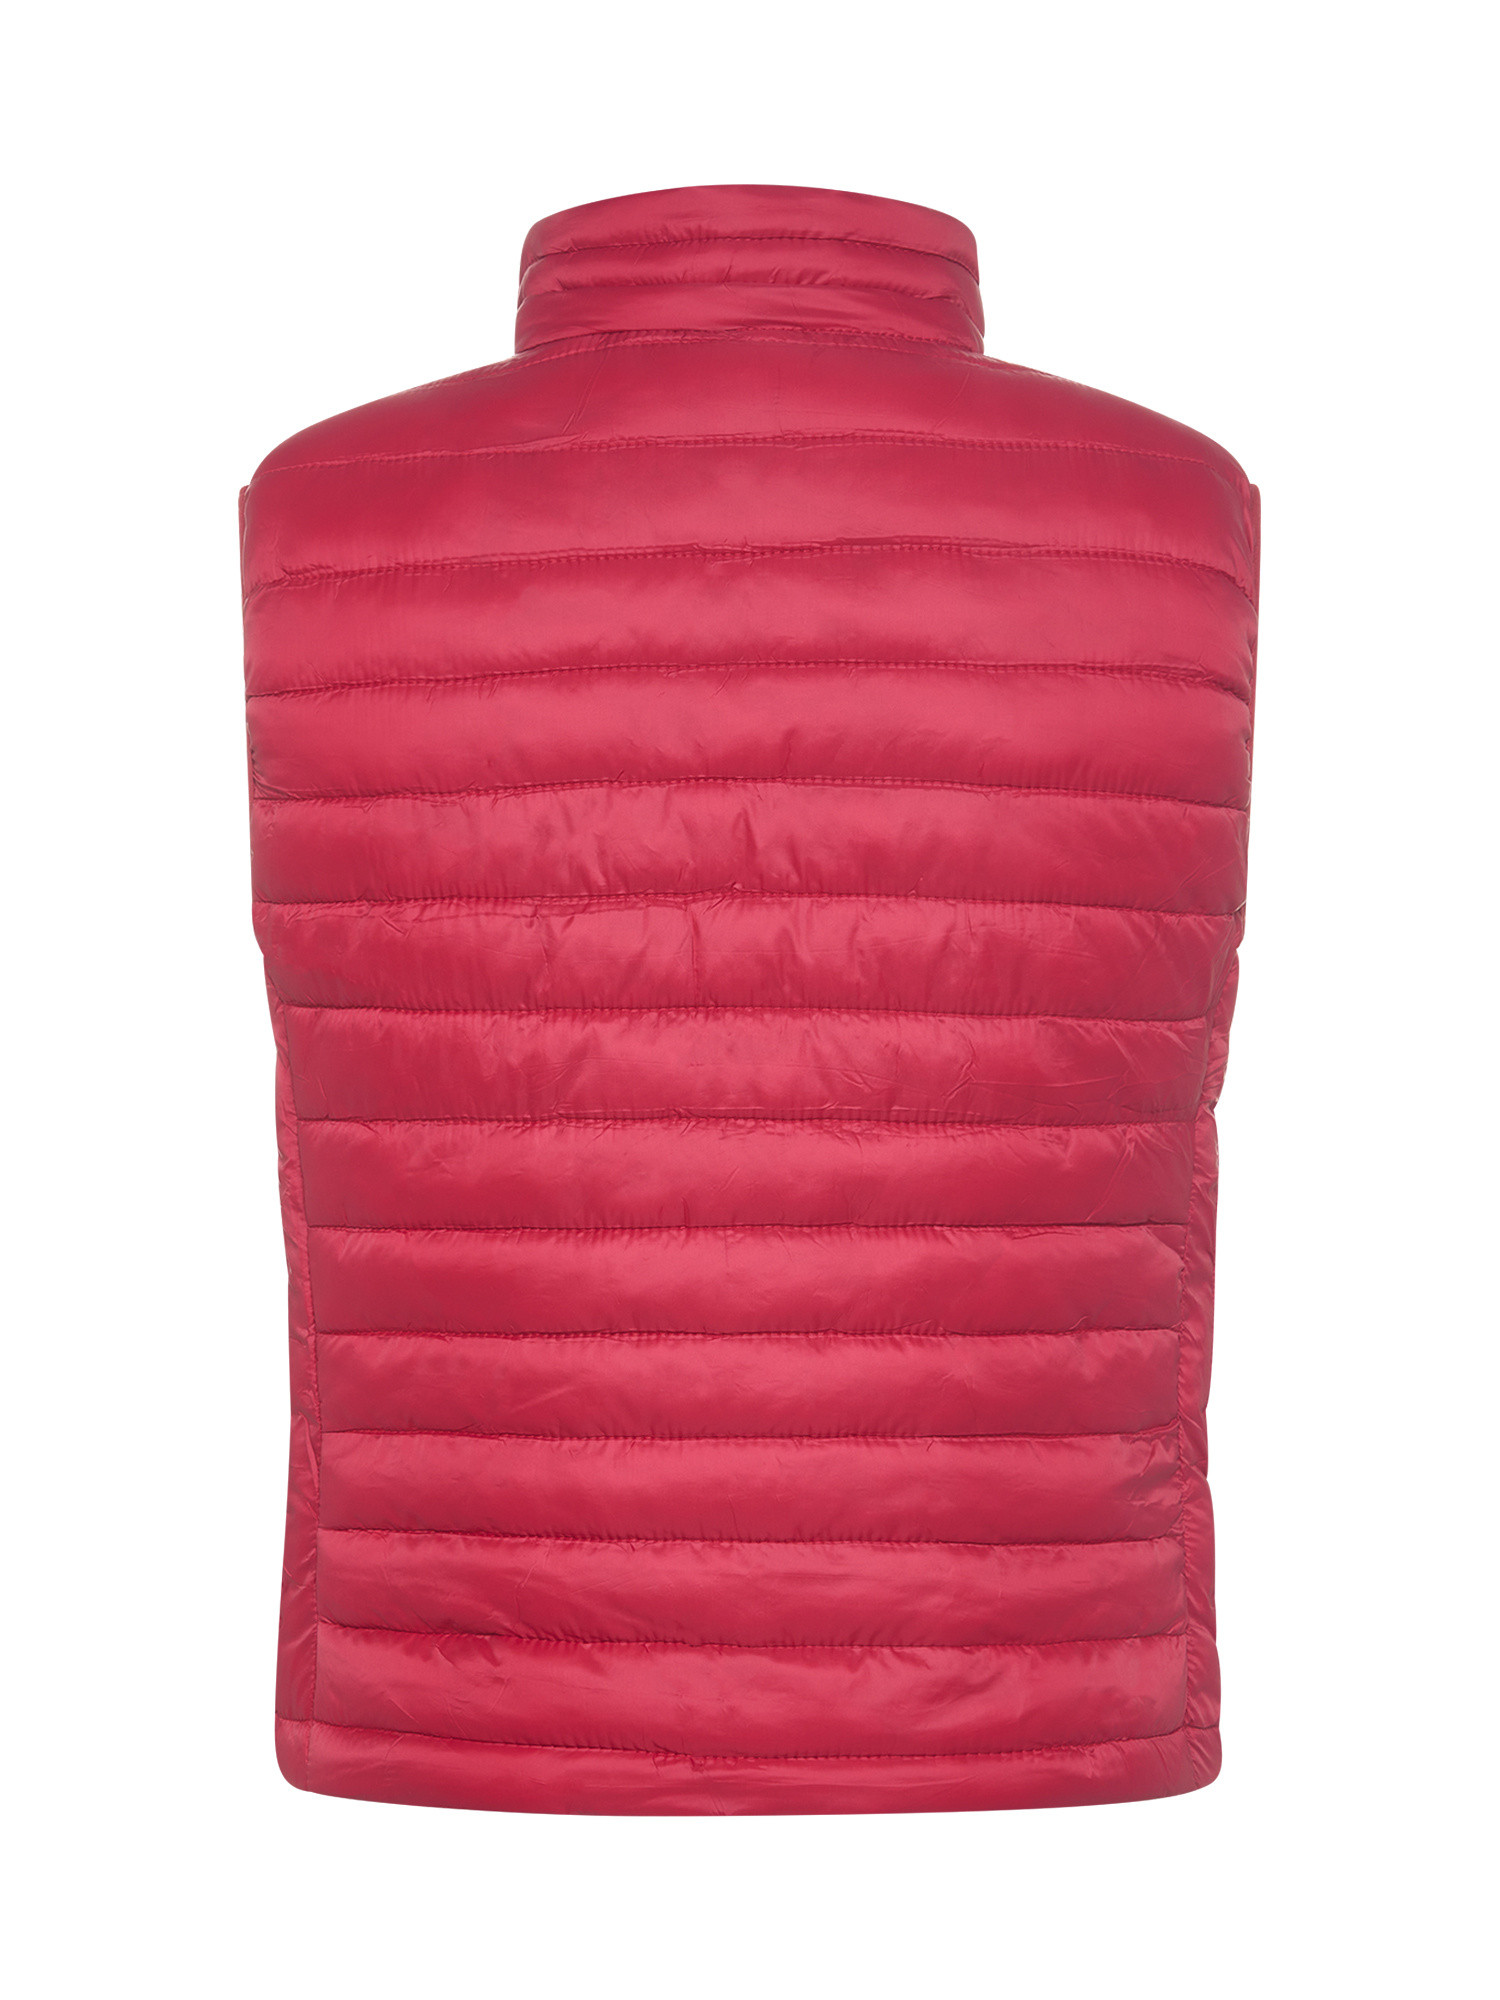 JCT - Quilted sleeveless down jacket, Red, large image number 1